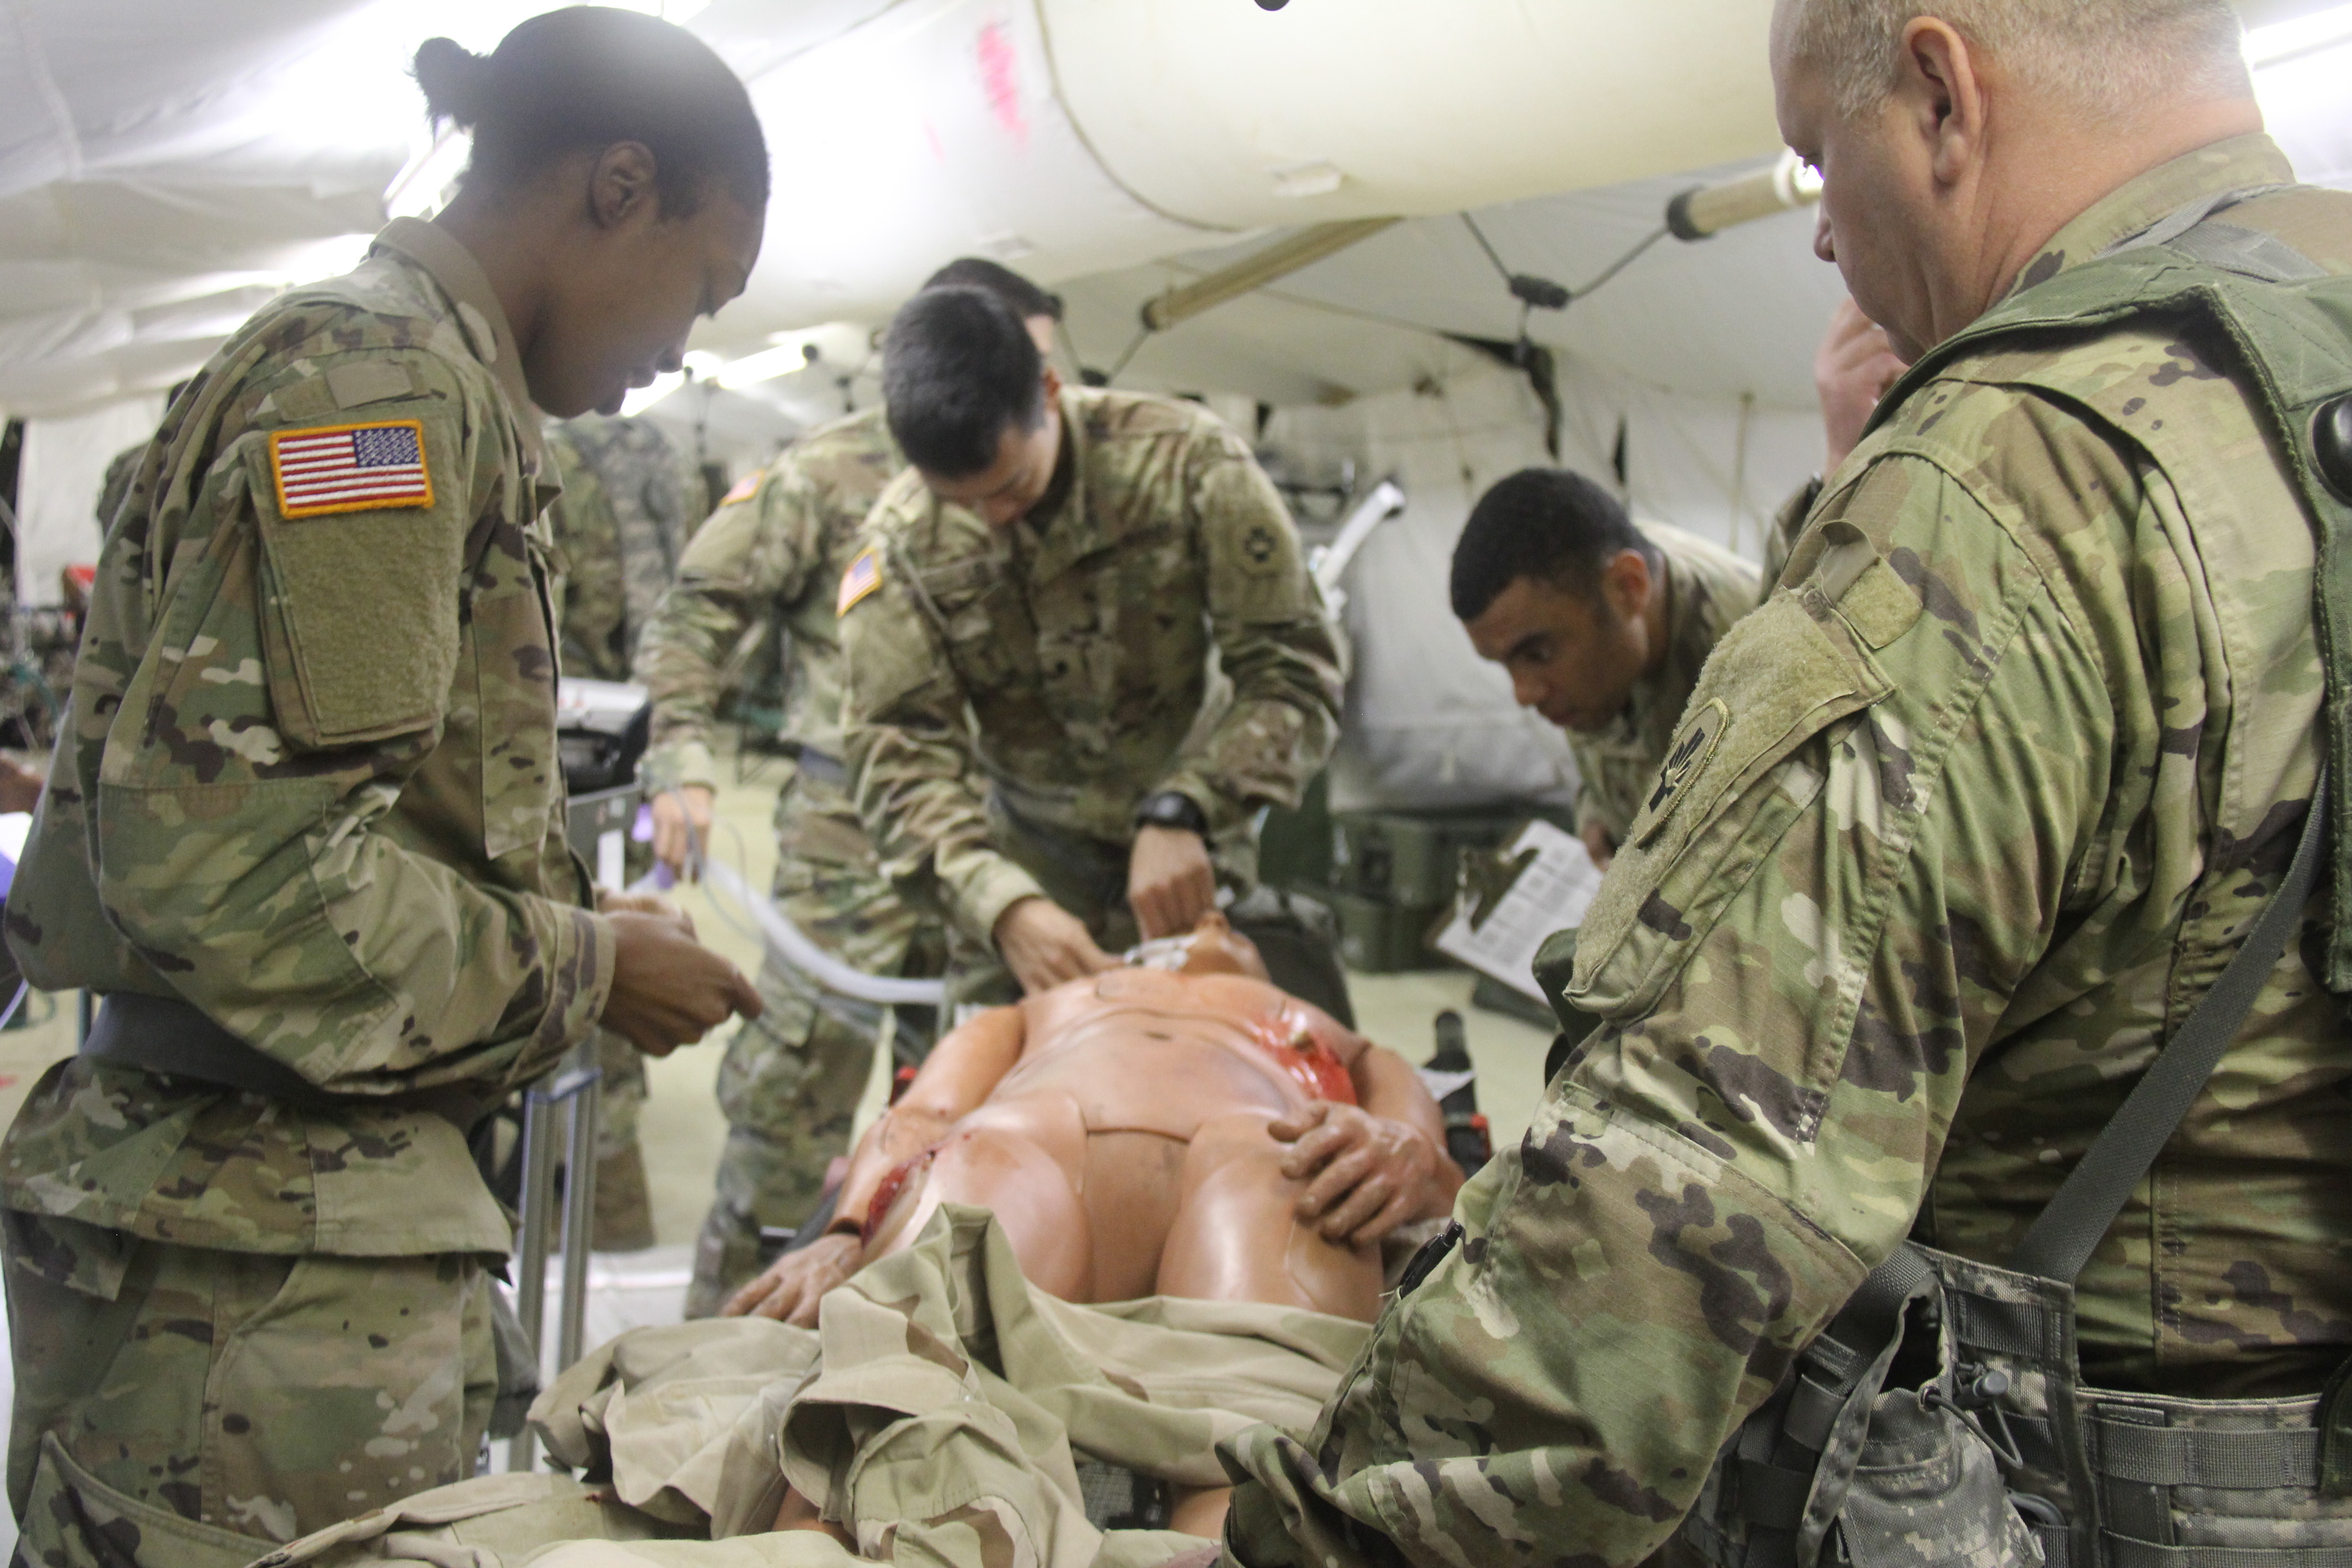 RTSMedical, MSTC plan for busy 2020 at Fort McCoy > U.S. Army Reserve